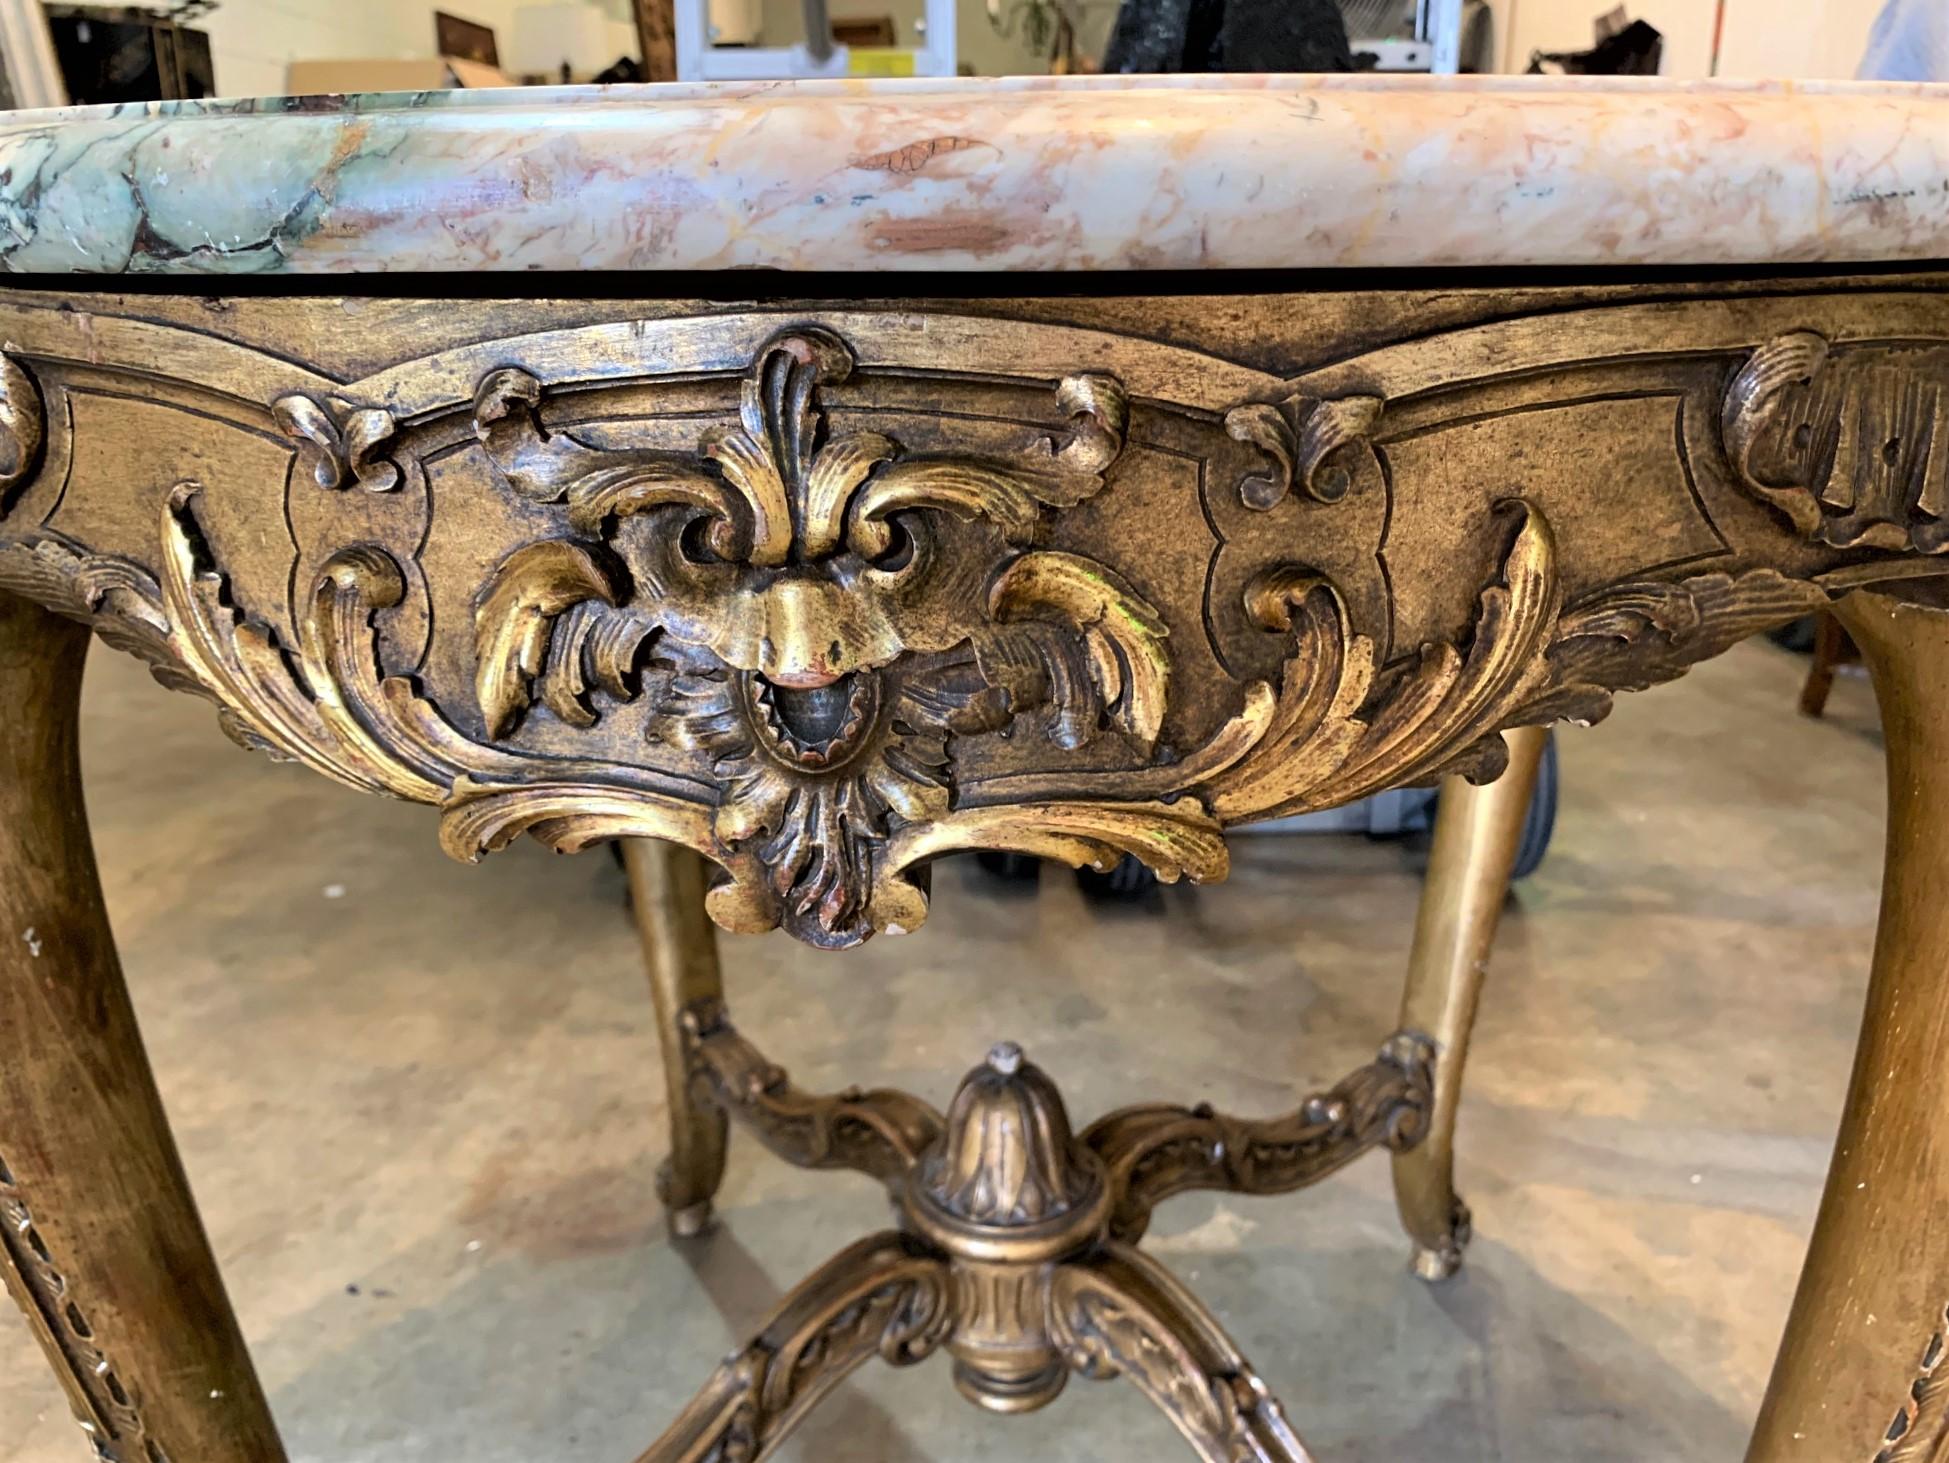 Exceptional 19th century French Louis XV style circular marble top center table. Crafted of giltwood and carved in a raised foliate motif. The elegant cabriole legs are joined by a nicely contoured cross-stretcher,

circa 1870.